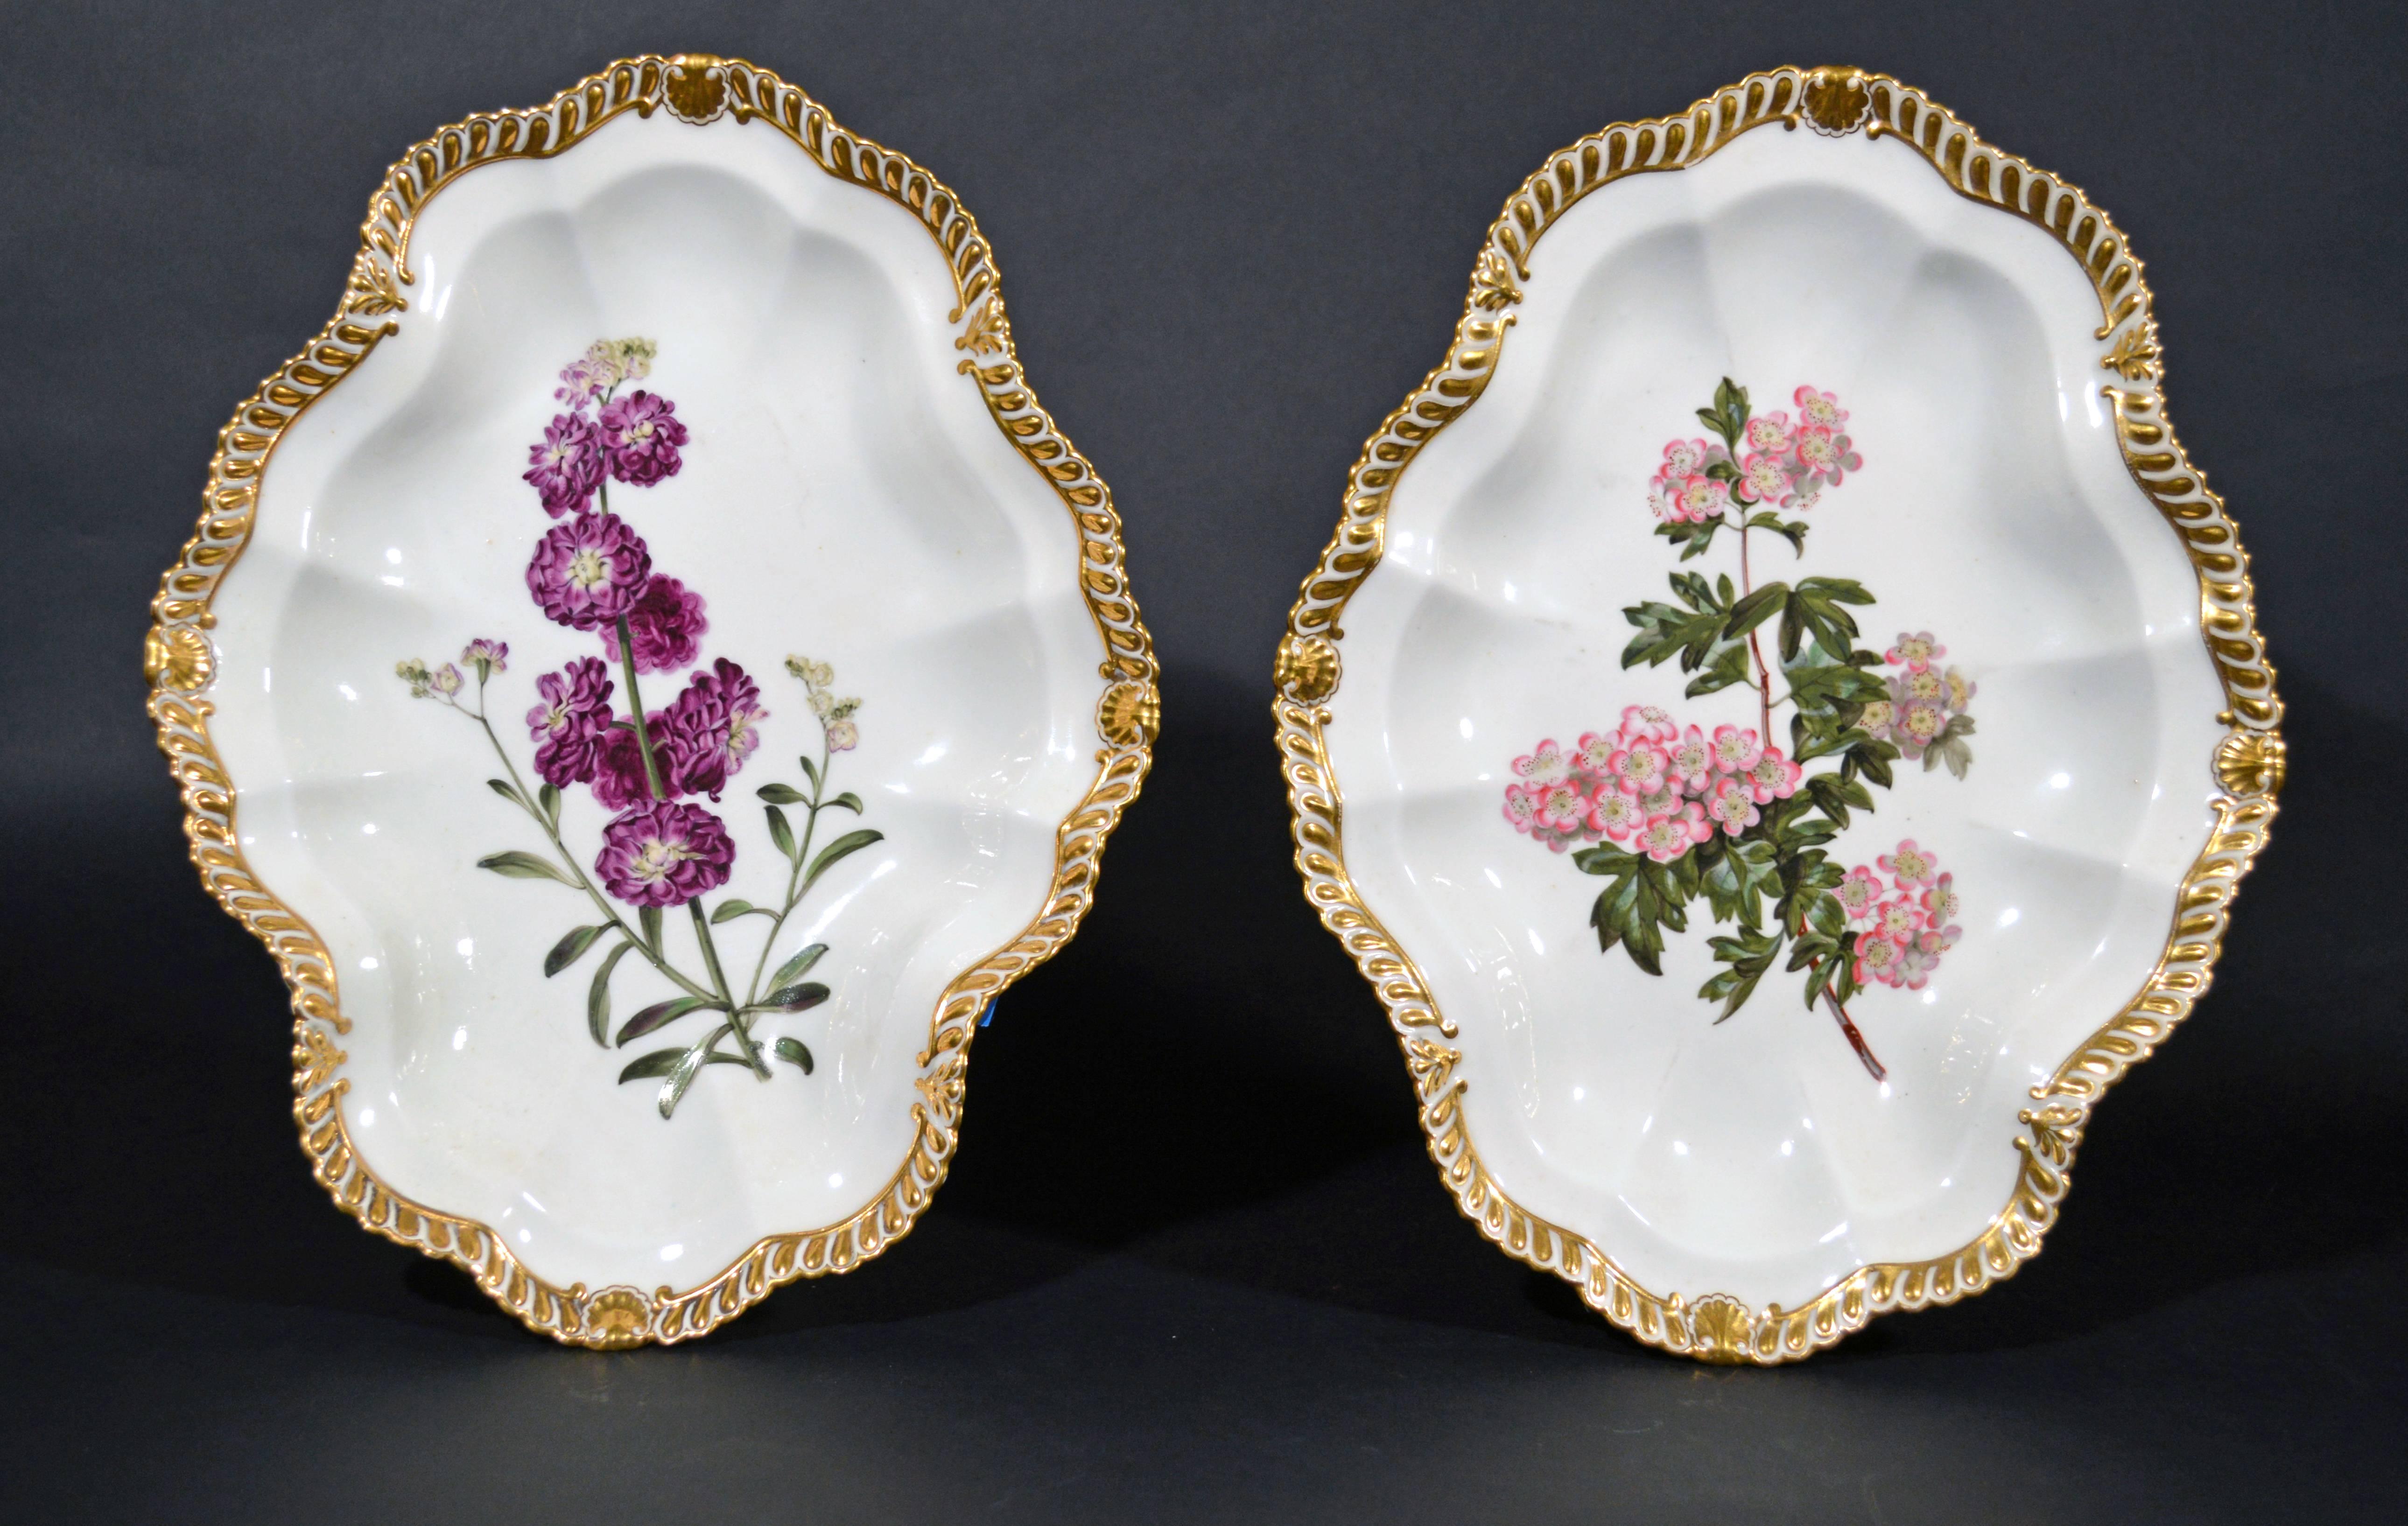 Exciting Chamberlain Worcester porcelain pair of oval shaped dishes are gadroon-edged with a gilt and white design with alternating moulded shell and fleur de lis panels. Each dish is finely painted with a single specimen, each named on